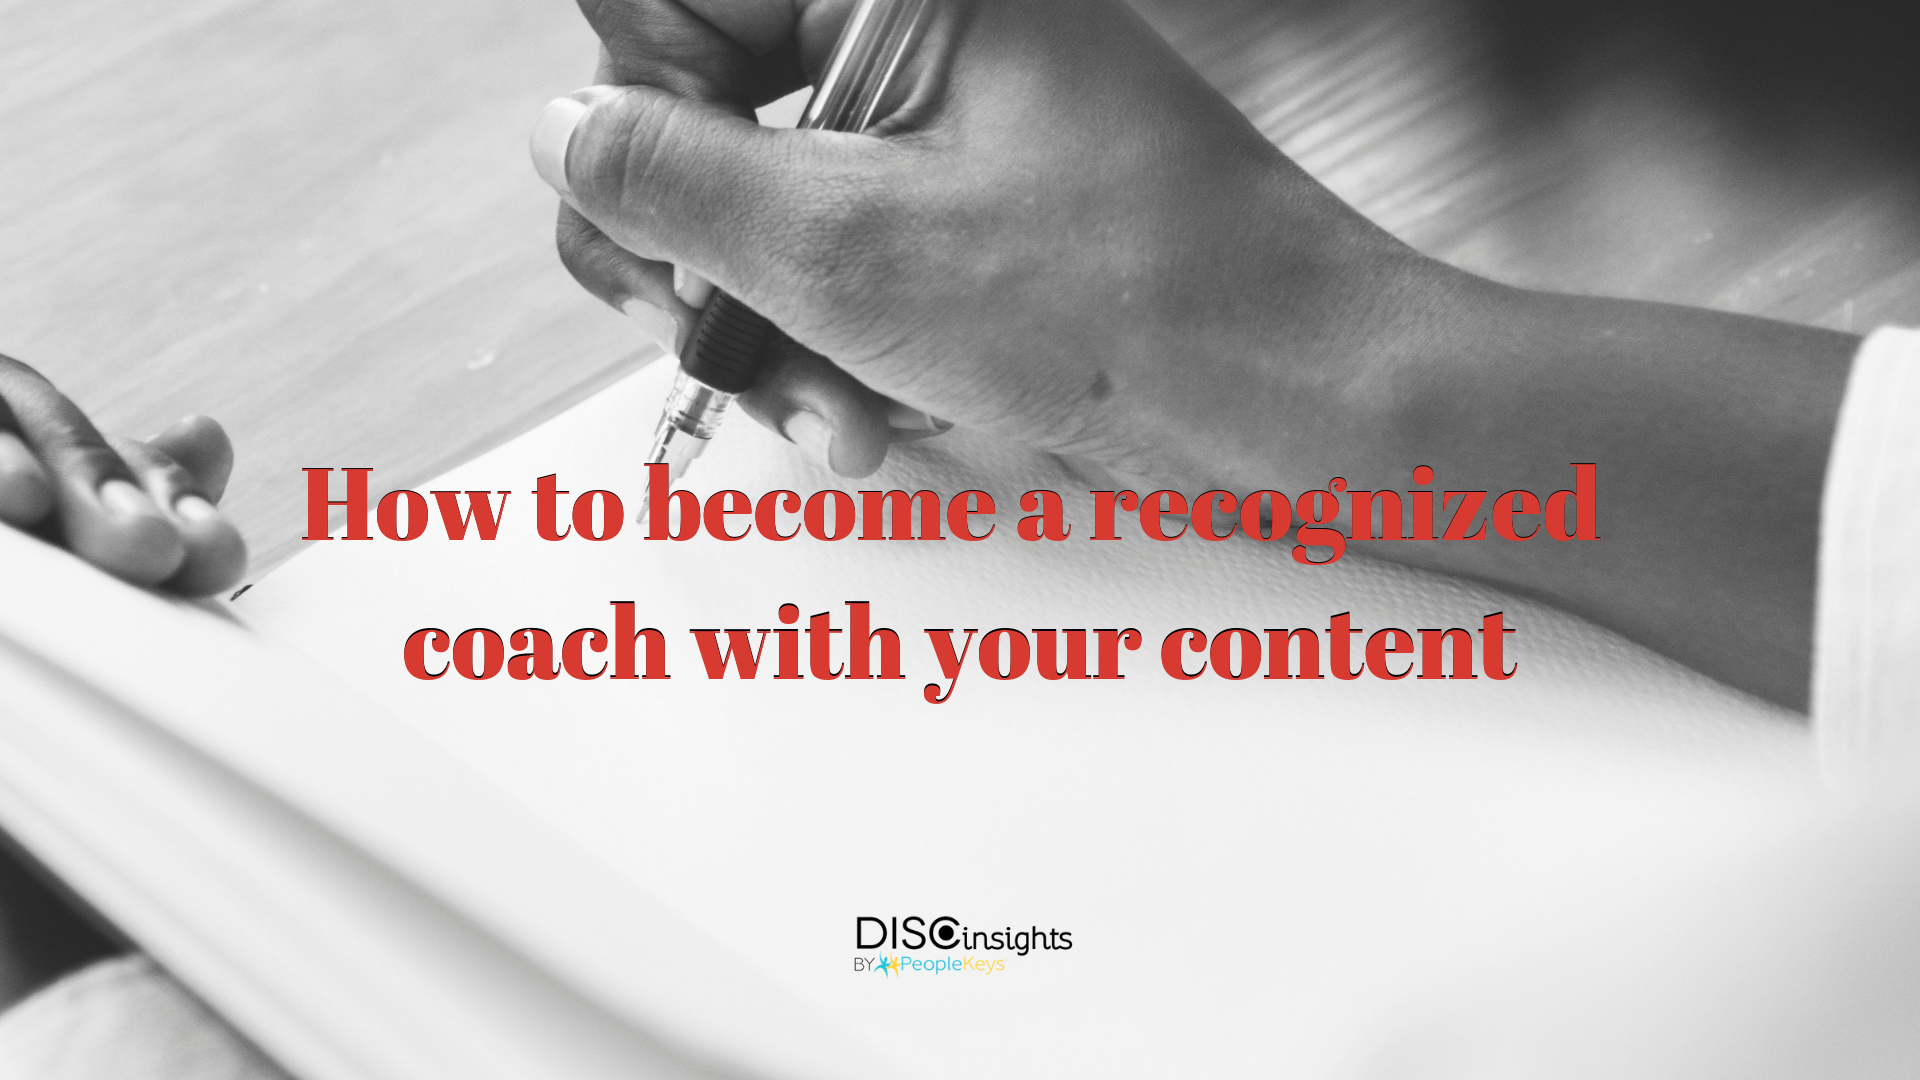 How to become a recognized coach with your content